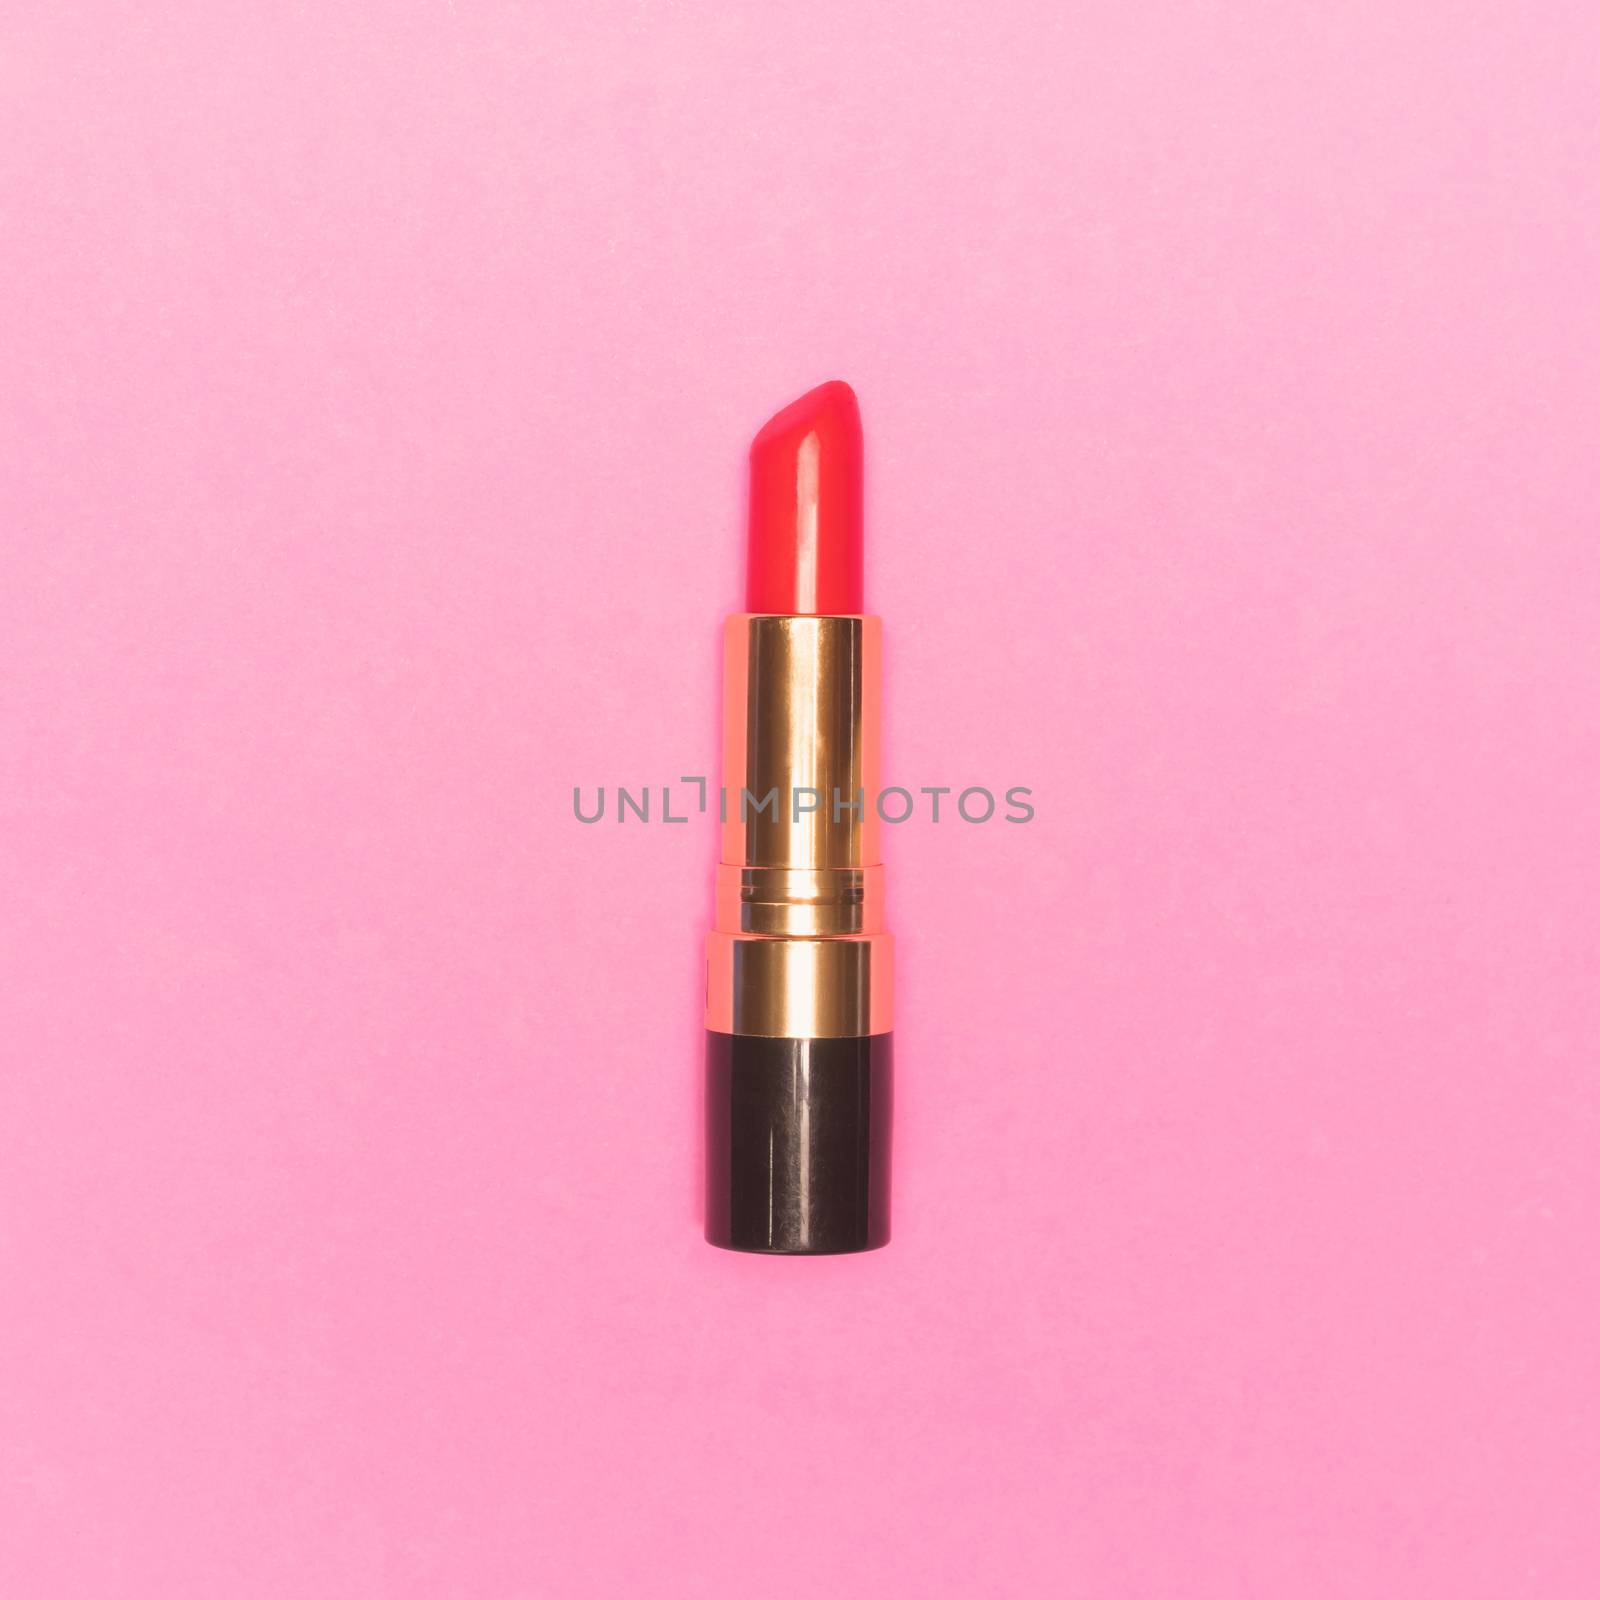 Lipstick on pink background.  Makeup and Beauty concept